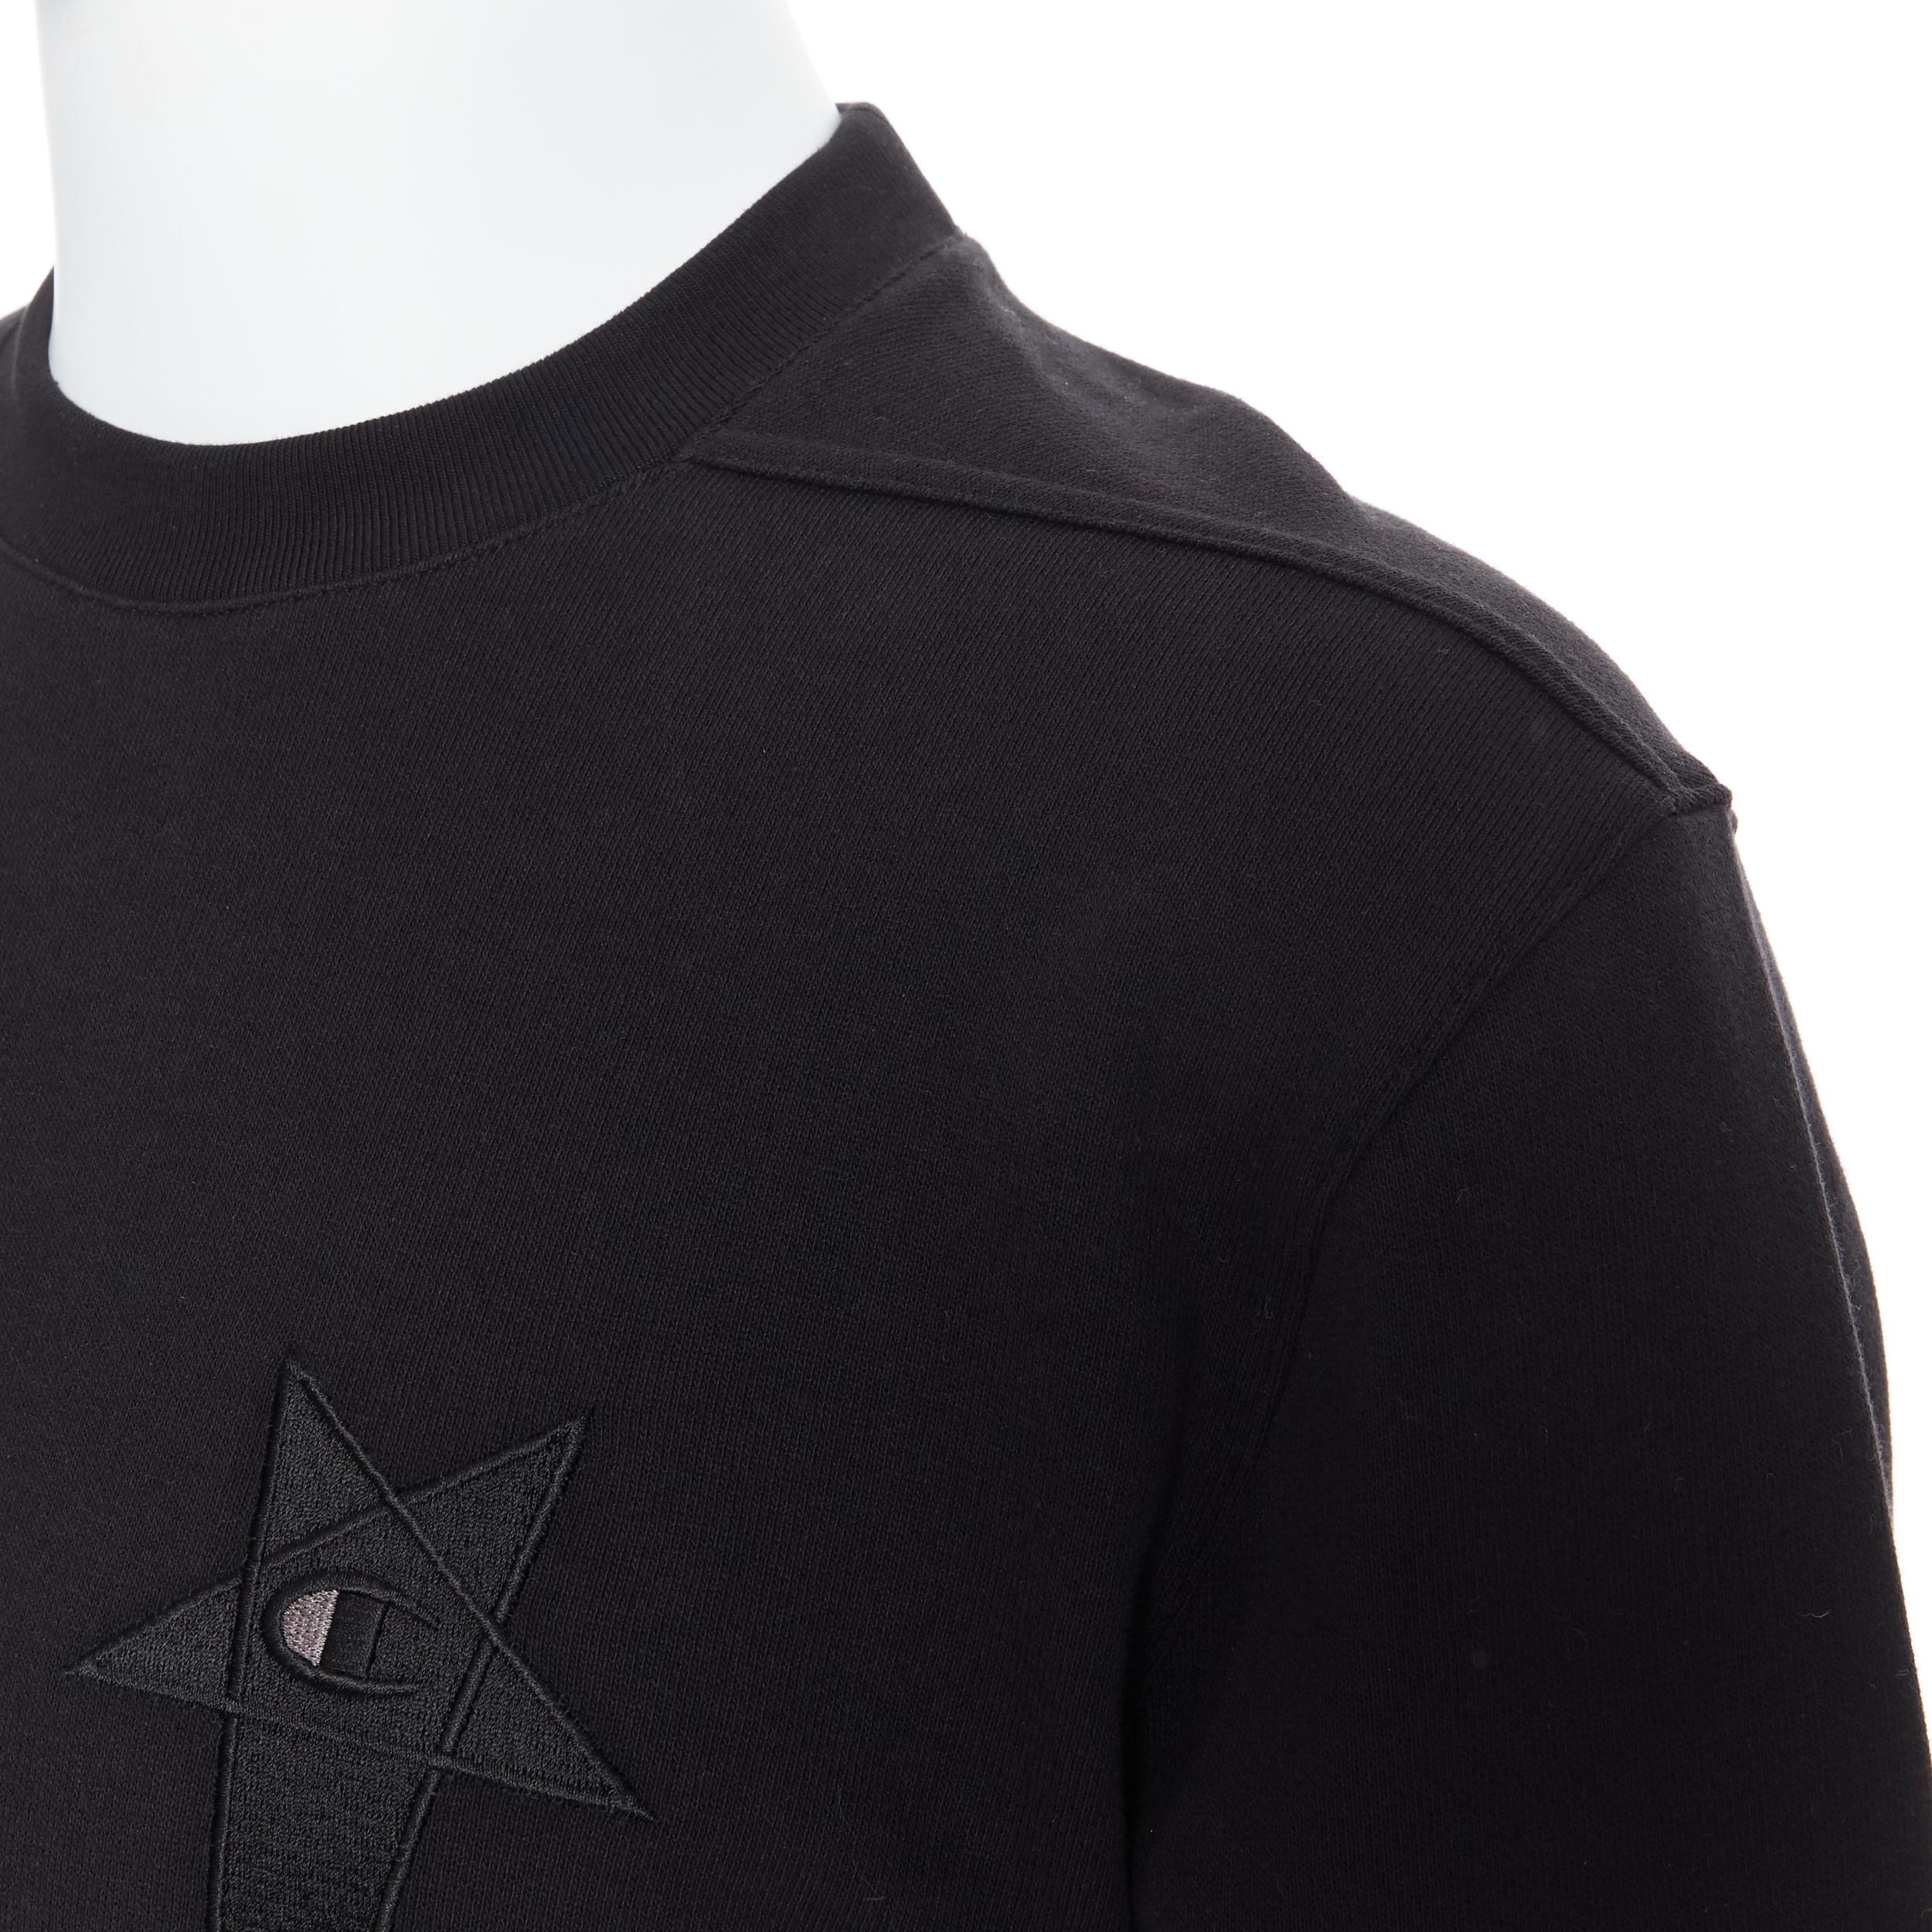 new RICK OWENS CHAMPION SS20 Tecuatl Black Pentagram Star embroidered sweater S
Brand: Rick Owens
Designer: Champion
Collection: SS2020
Model Name / Style: Pentagram sweater
Material: Cotton
Color: Black
Pattern: Solid
Extra Detail: Snap button